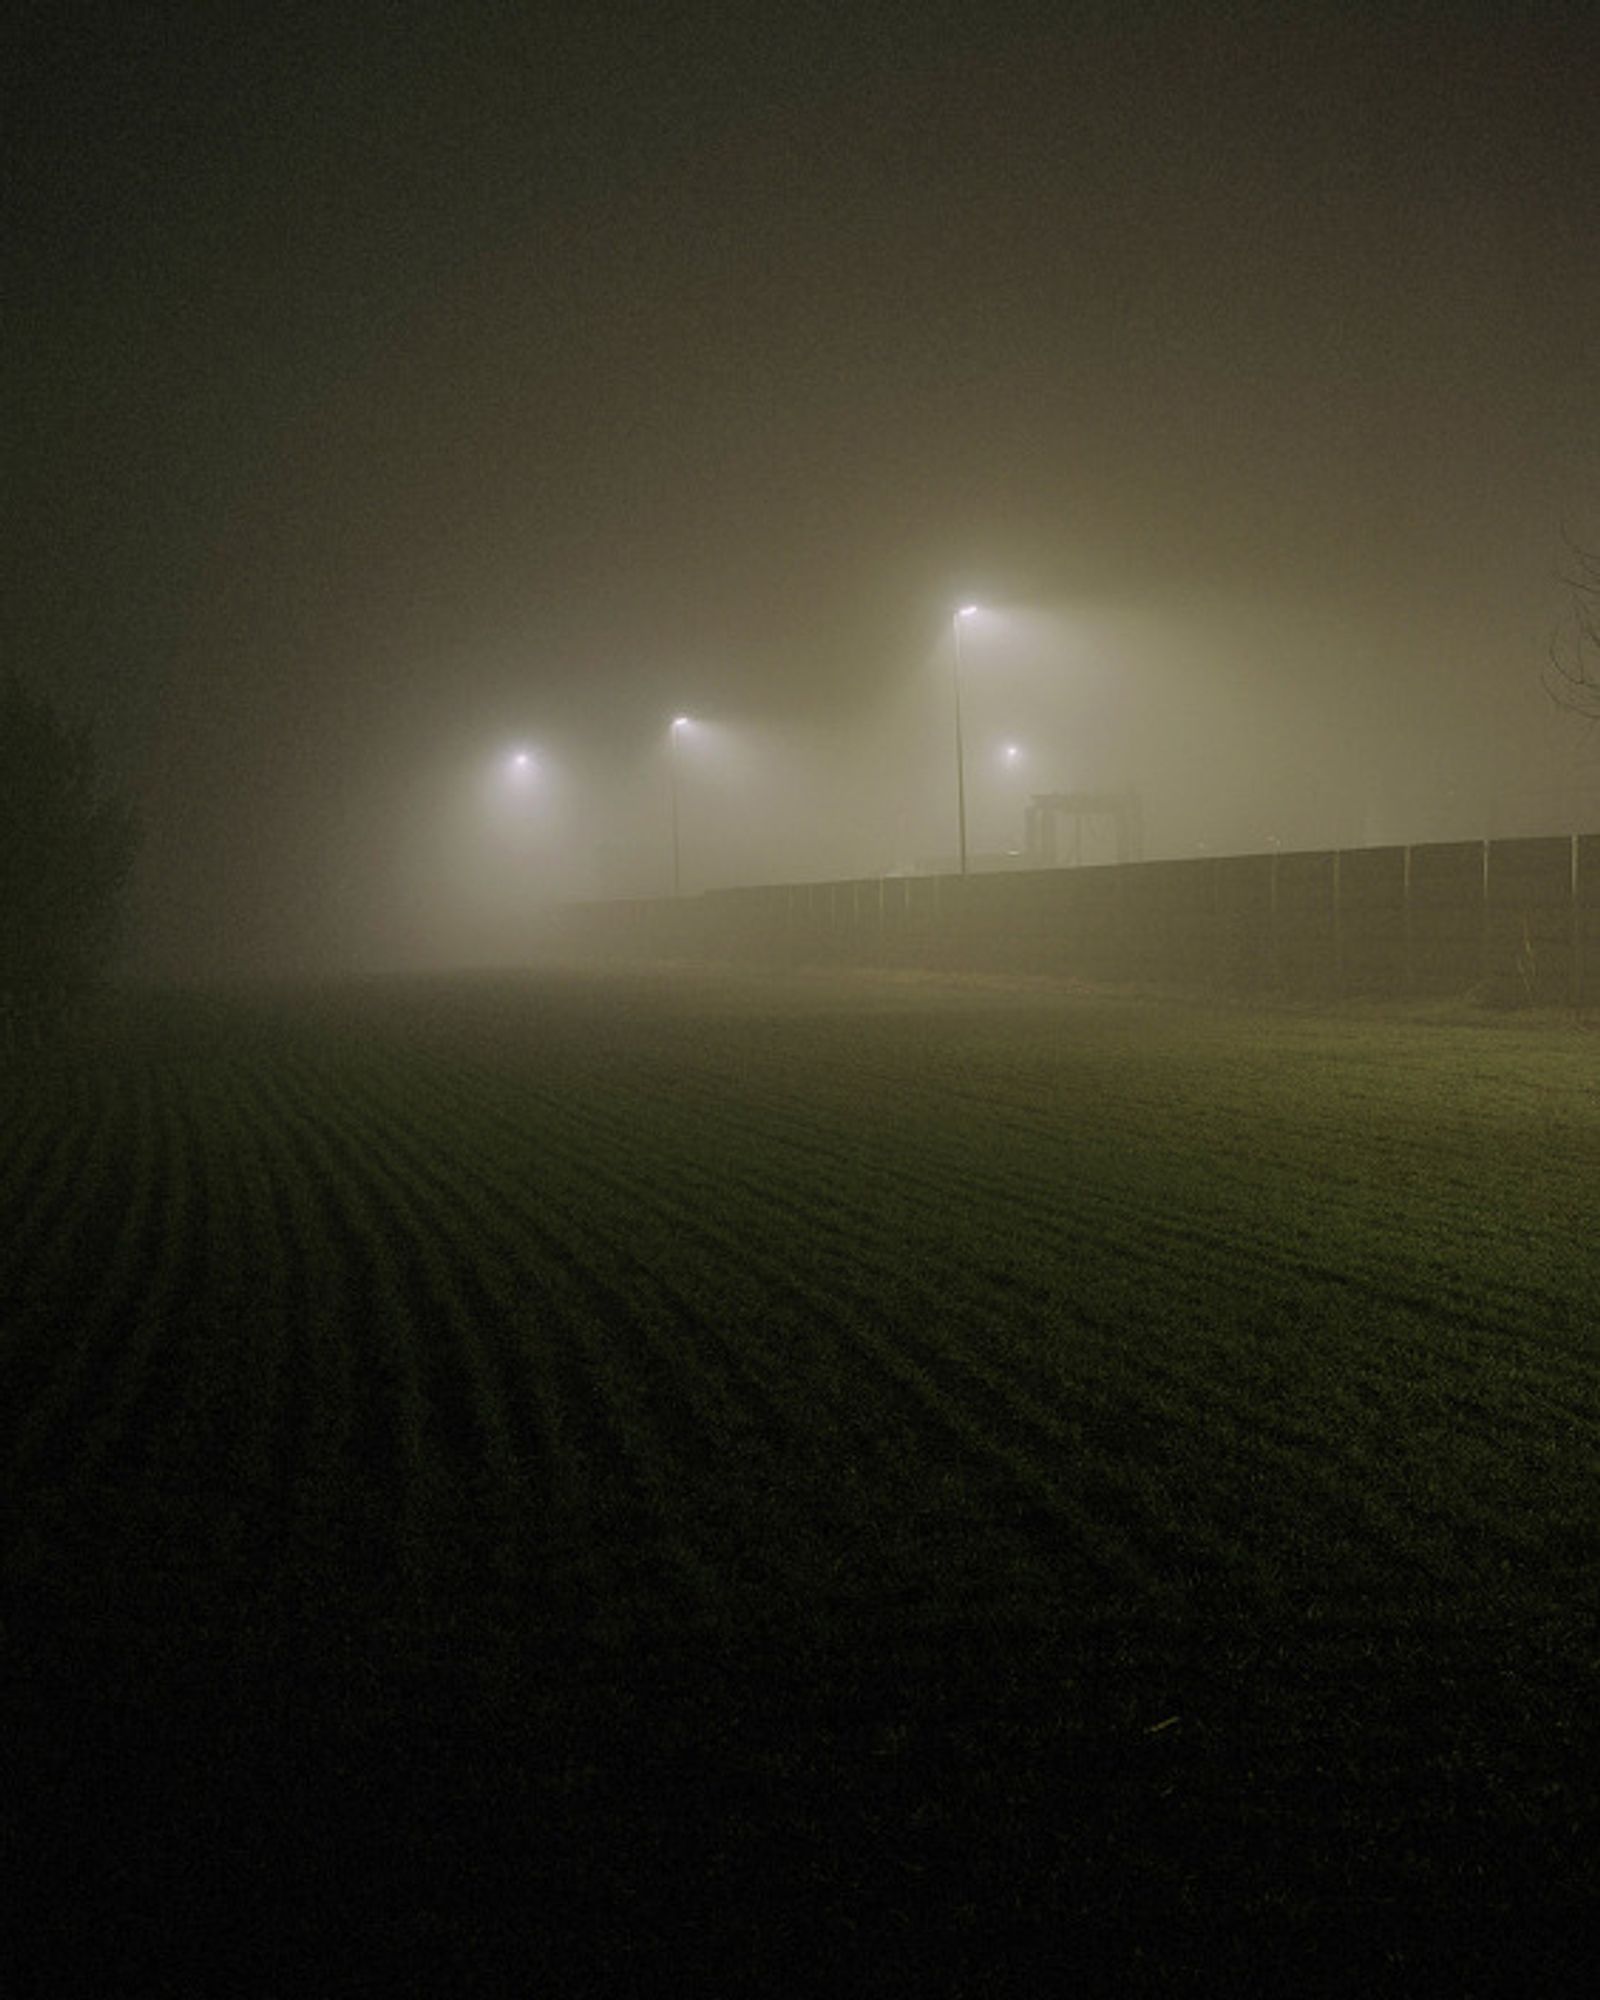 © Matteo Malvino - Image from the The New Countryside photography project